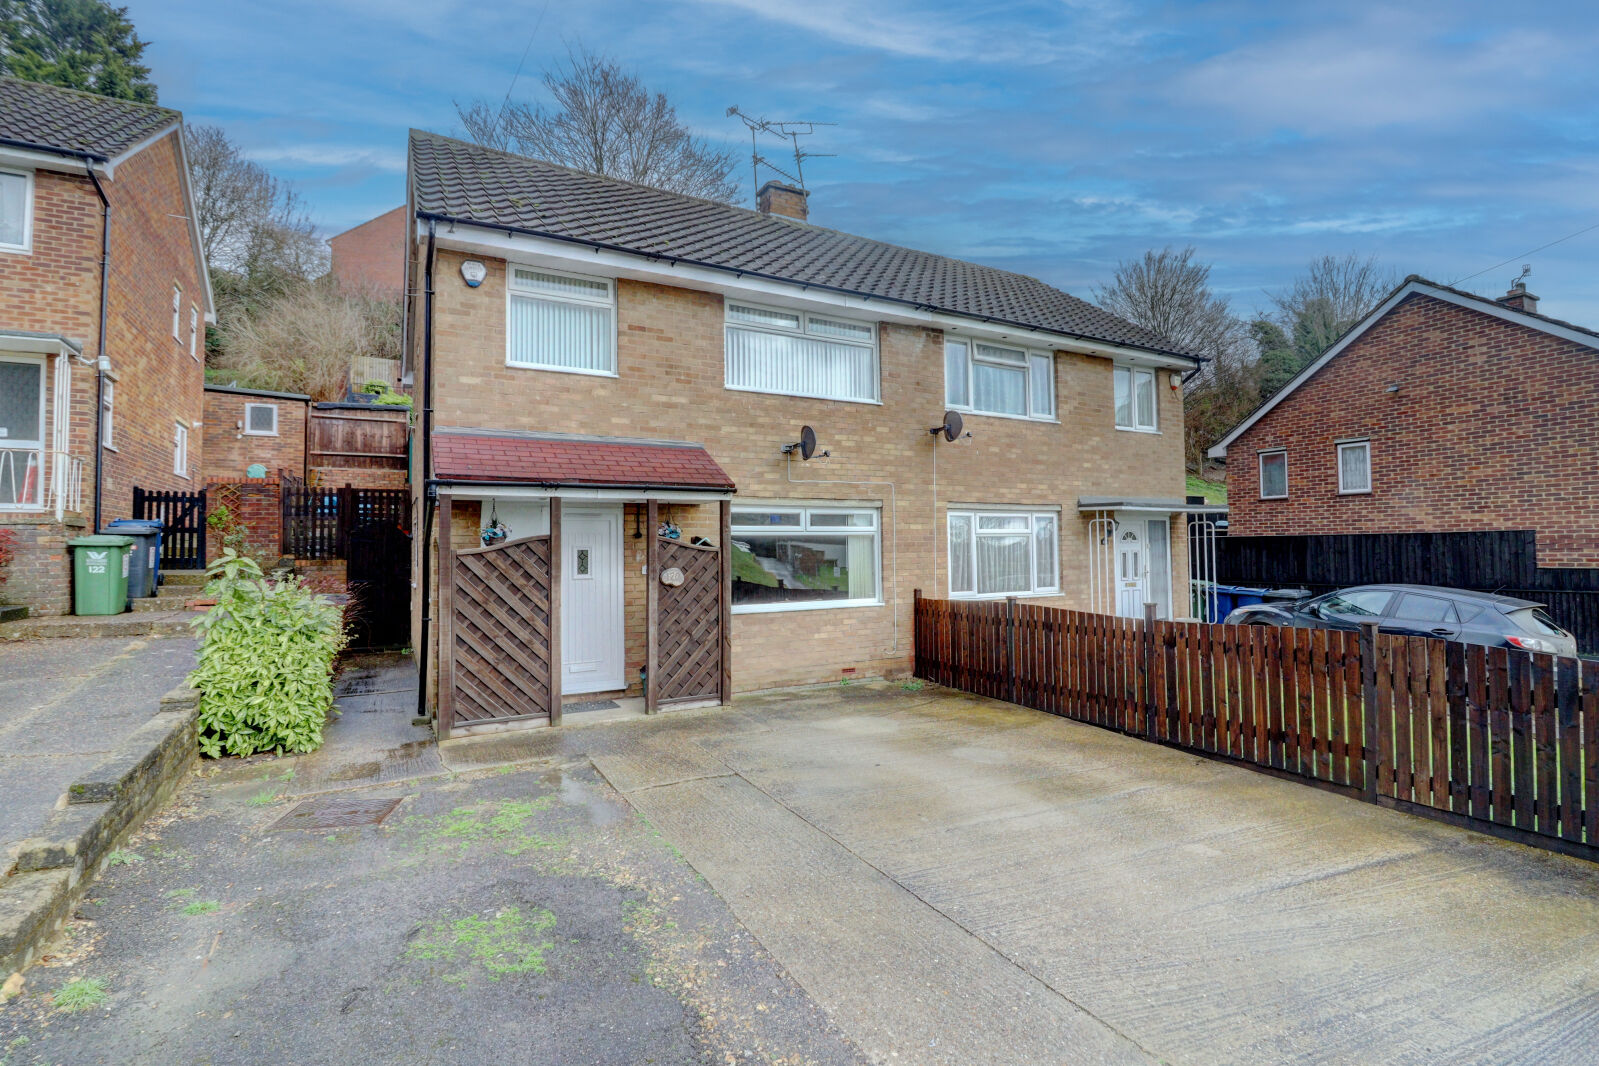 3 bedroom semi detached house for sale Hicks Farm Rise, High Wycombe, HP13, main image